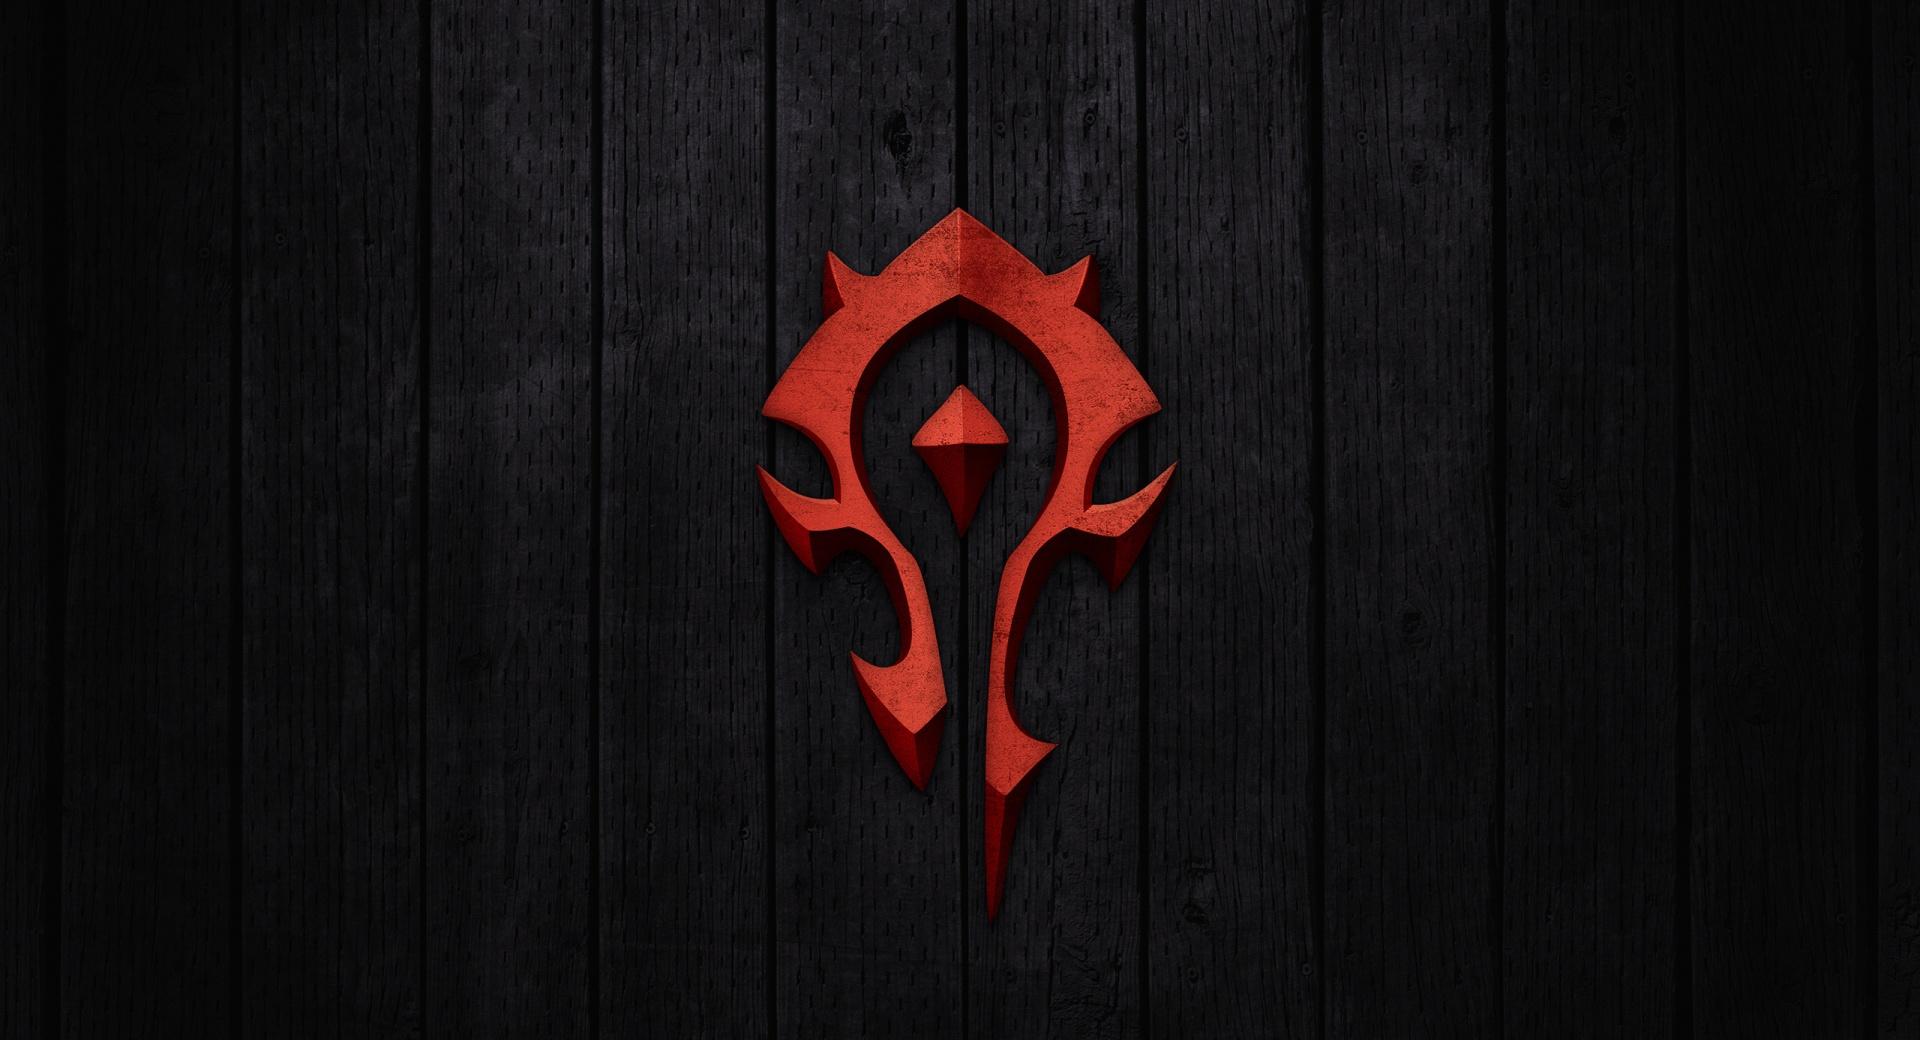 World of Warcraft - Horde Sign wallpapers HD quality